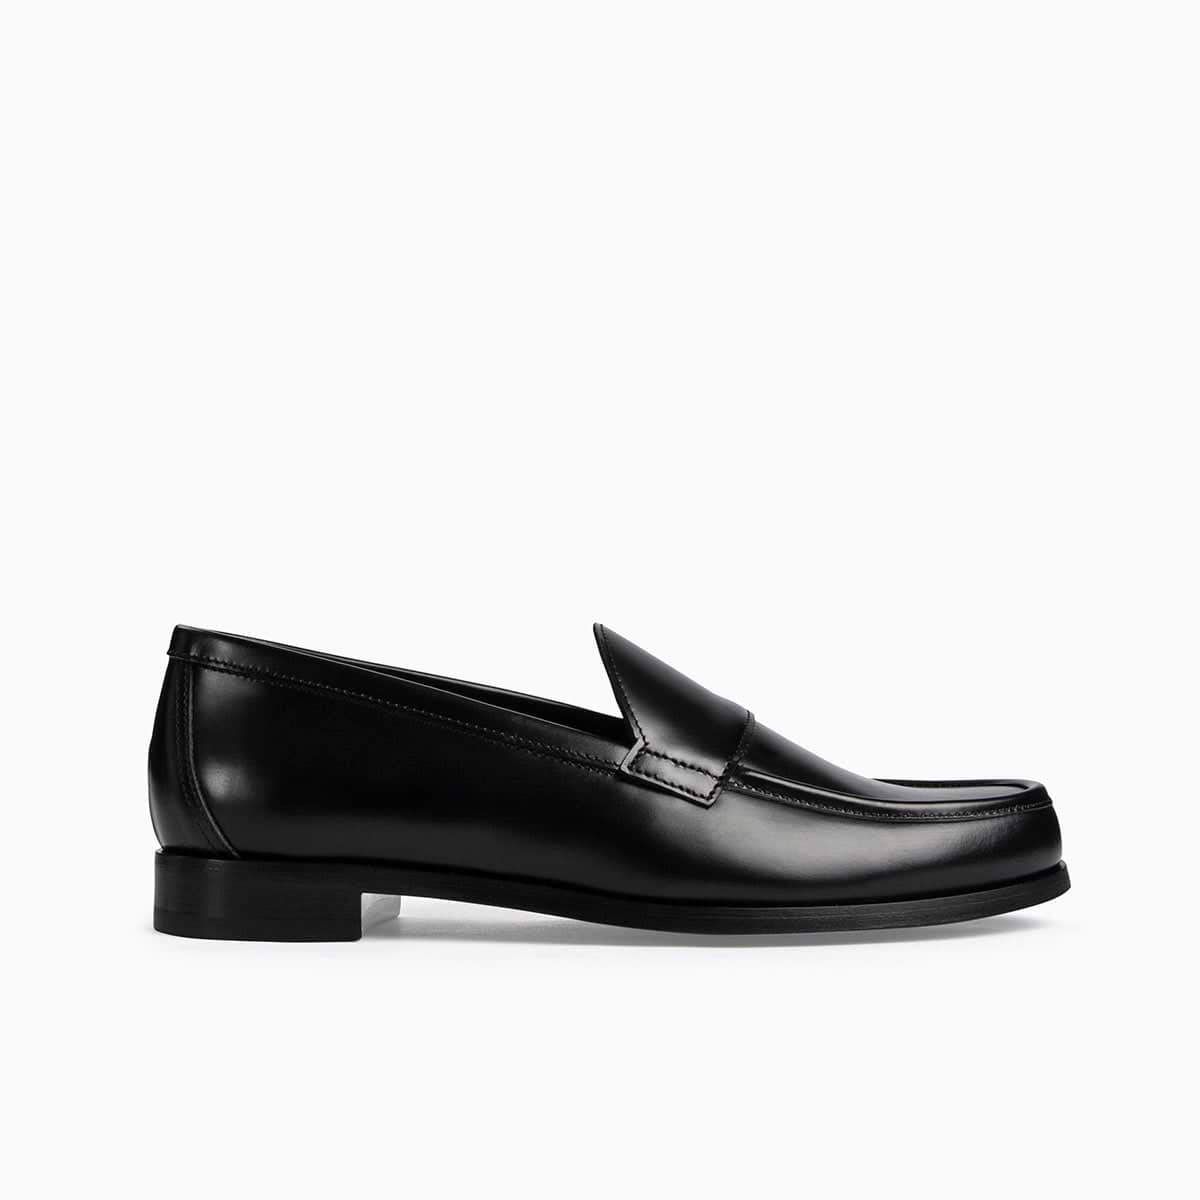 HARDY loafers for women in black calf leather — PIERRE HARDY